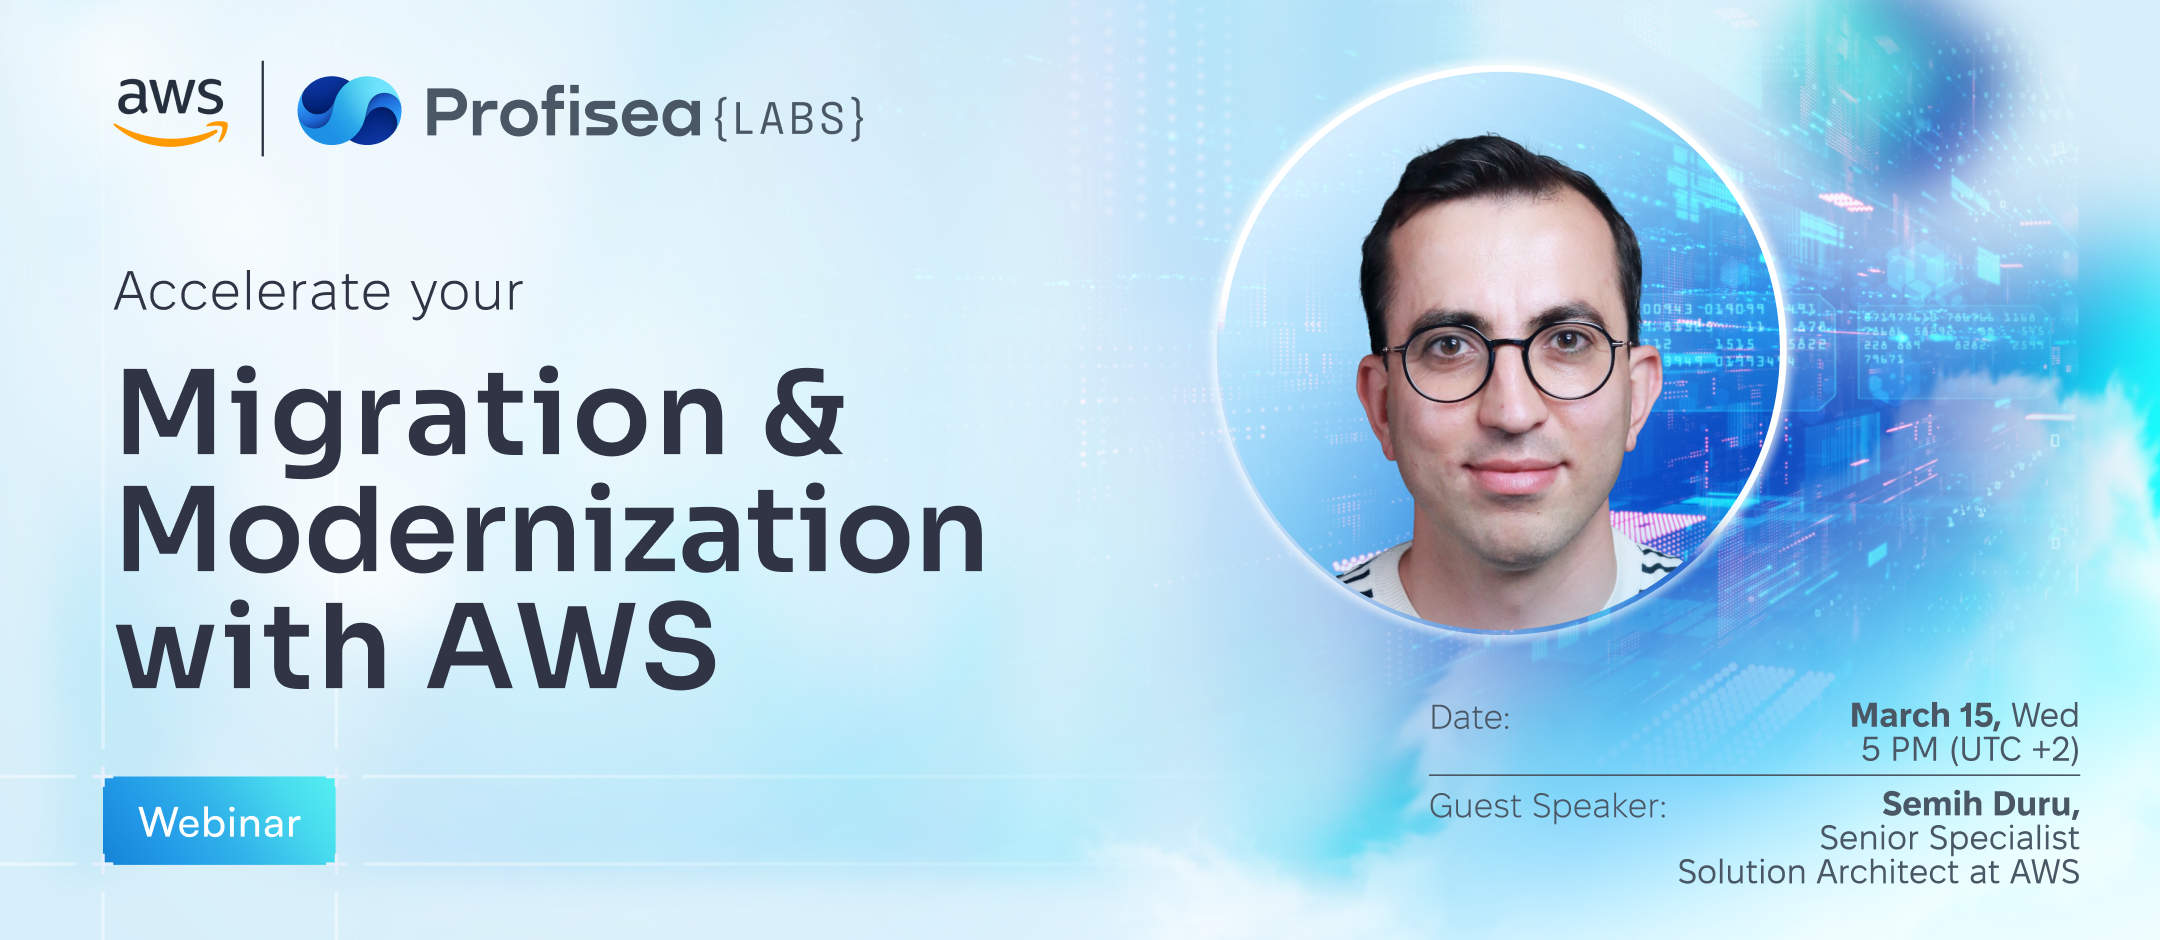 Accelerate your Migration & Modernization with AWS, Online Event